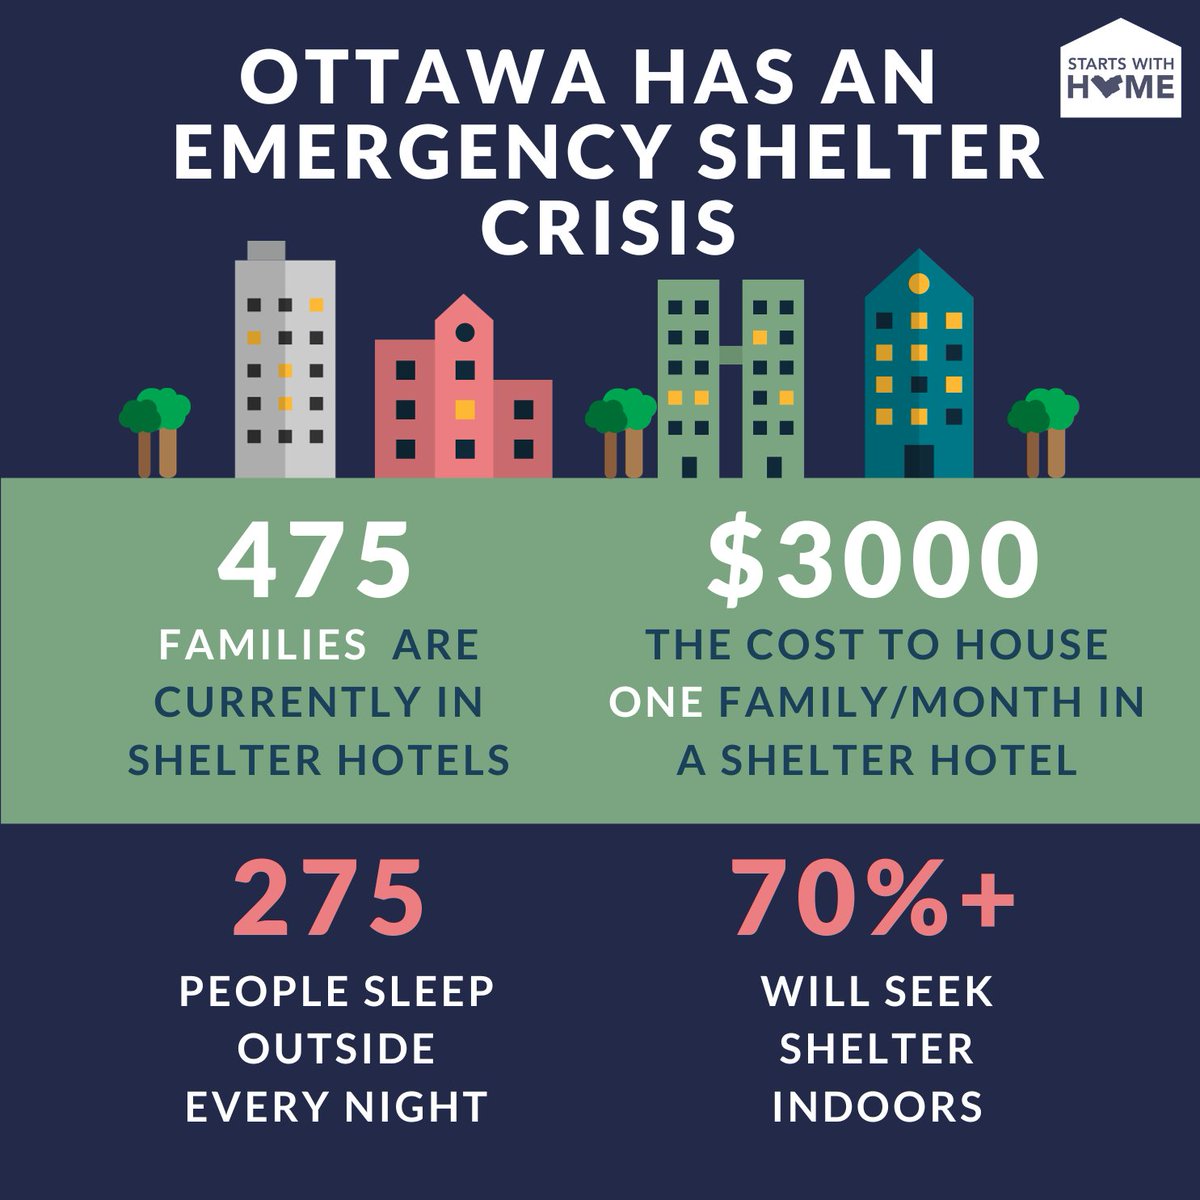 Every night, over 60 people are sleeping on chairs because no beds are available. 275 people are sleeping outside, and Ottawa anticipates that 70% of this group will need to access shelter when winter hits our city. startswithhome.ca/ottawa_s_homel… >